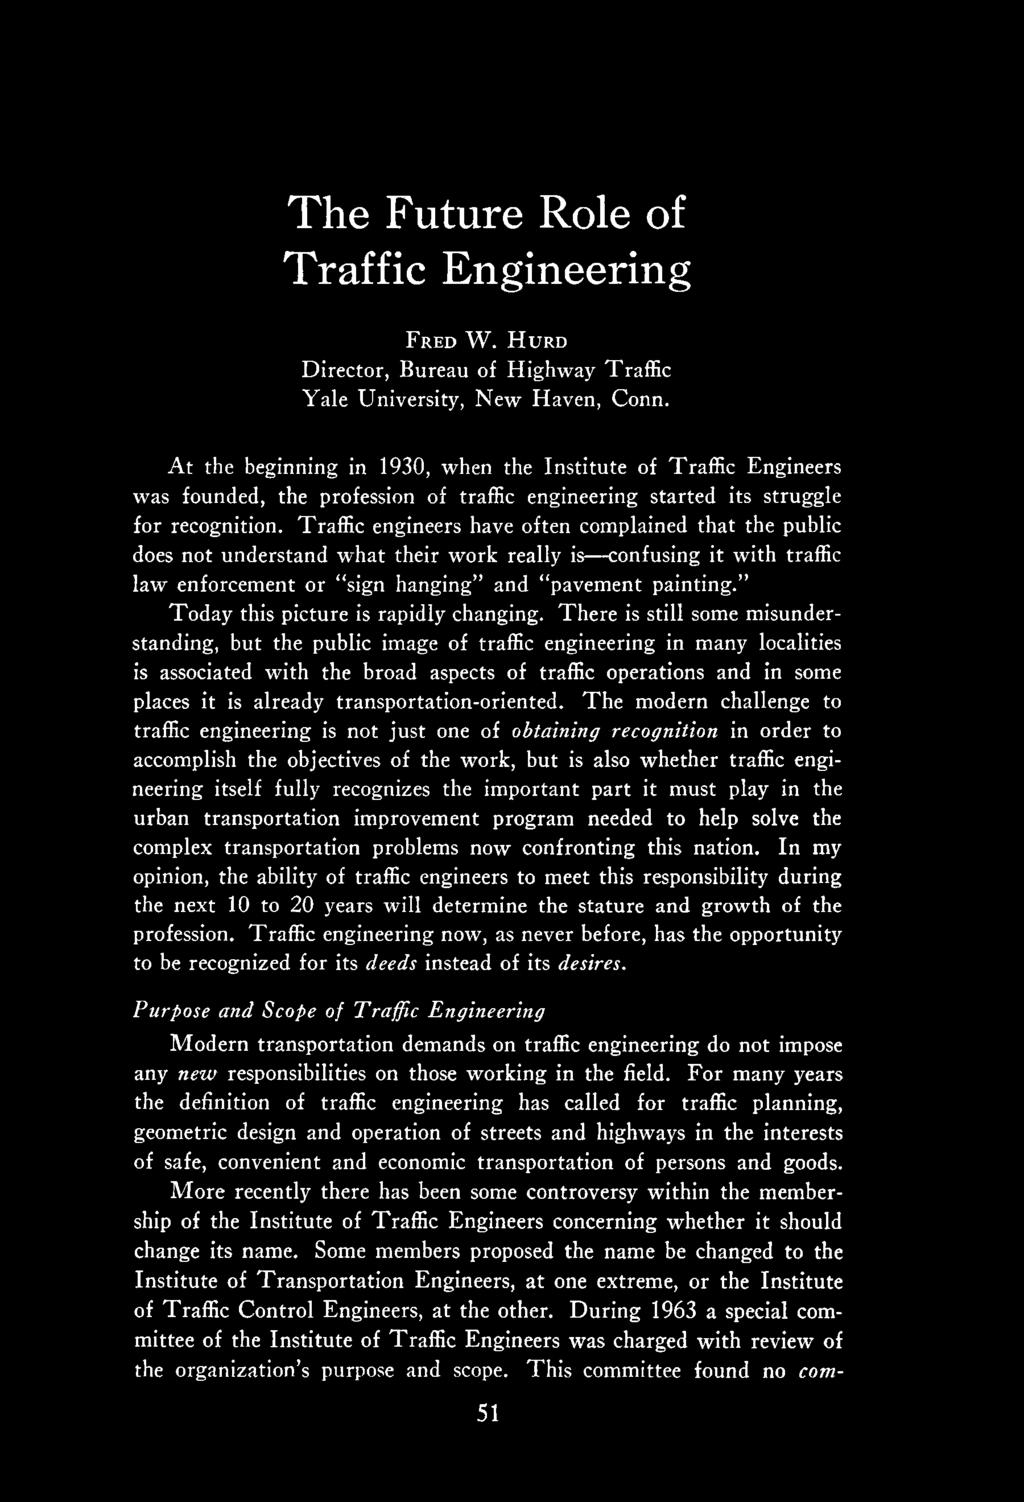 Traffic engineers have often complained that the public does not understand what their work really is confusing it with traffic law enforcement or sign hanging and pavement painting.